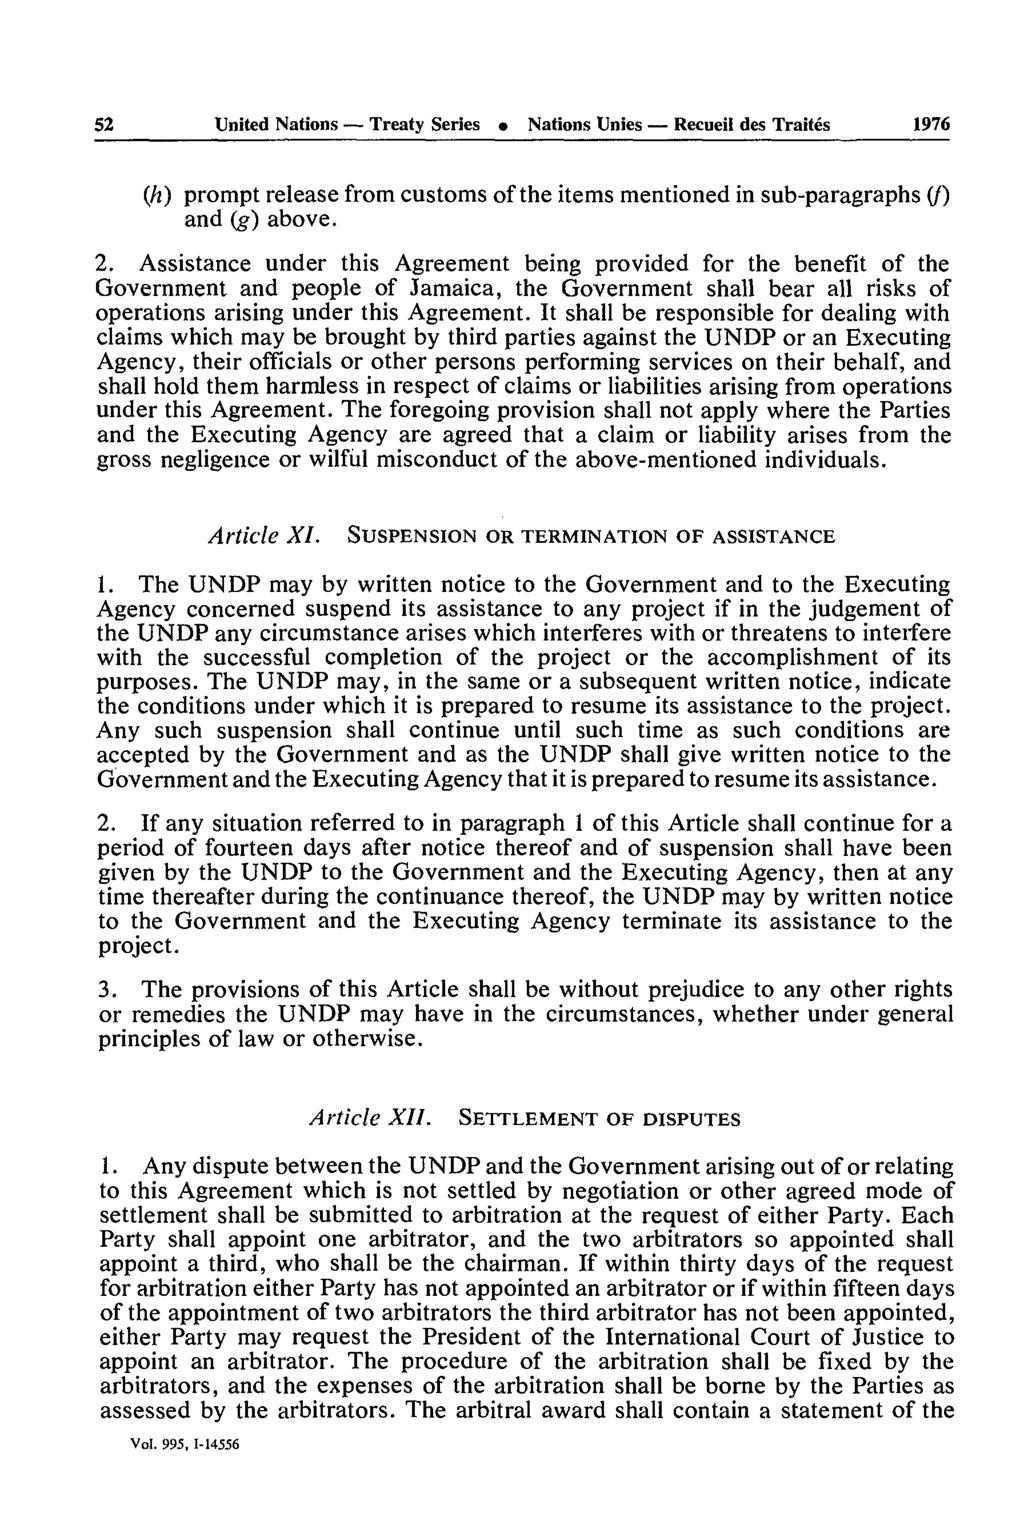 52 United Nations Treaty Series Nations Unies Recueil des Traités 1976 (h) prompt release from customs of the items mentioned in sub-paragraphs (/) and (g) above. 2.